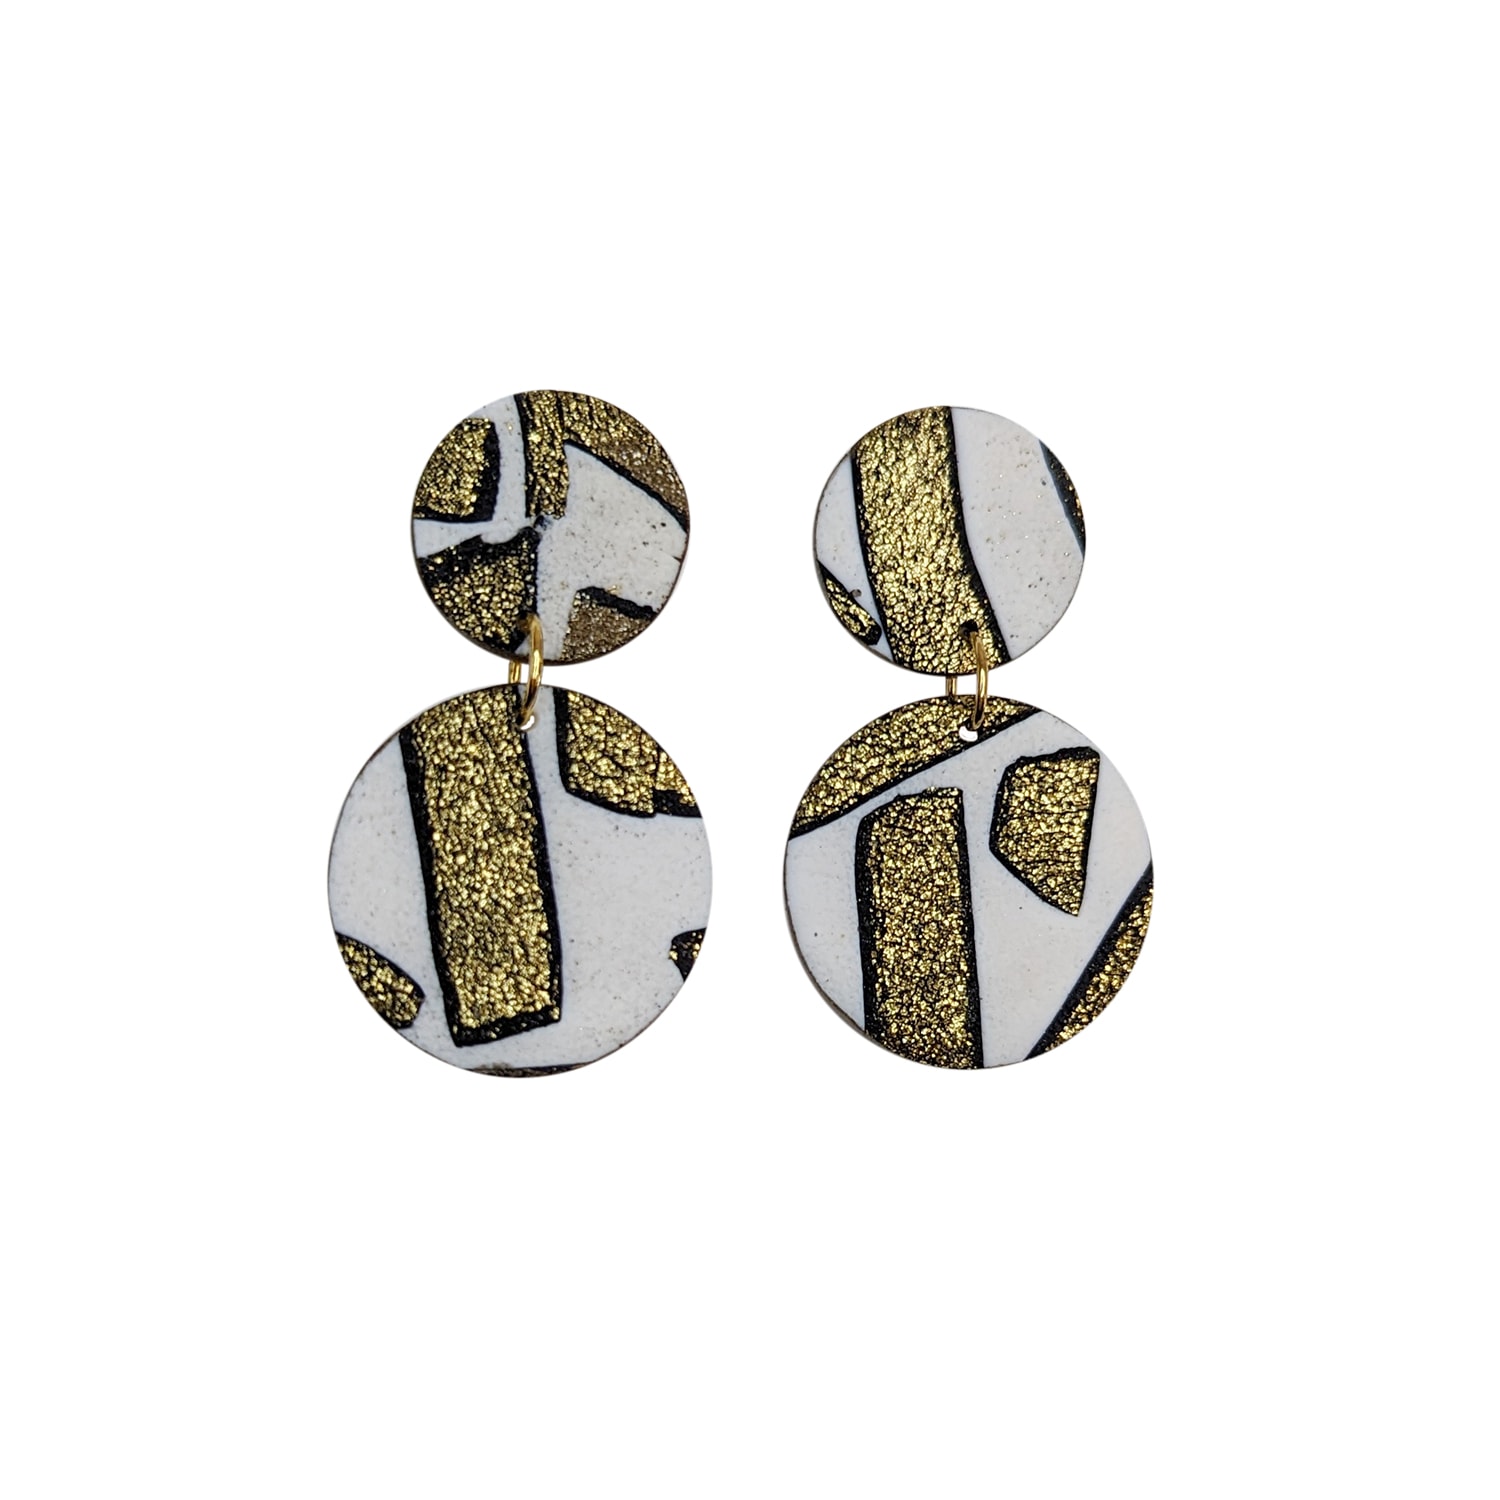 Women’s White / Black Romy Abstract White, Black And Gold Earrings Ziolla Designs